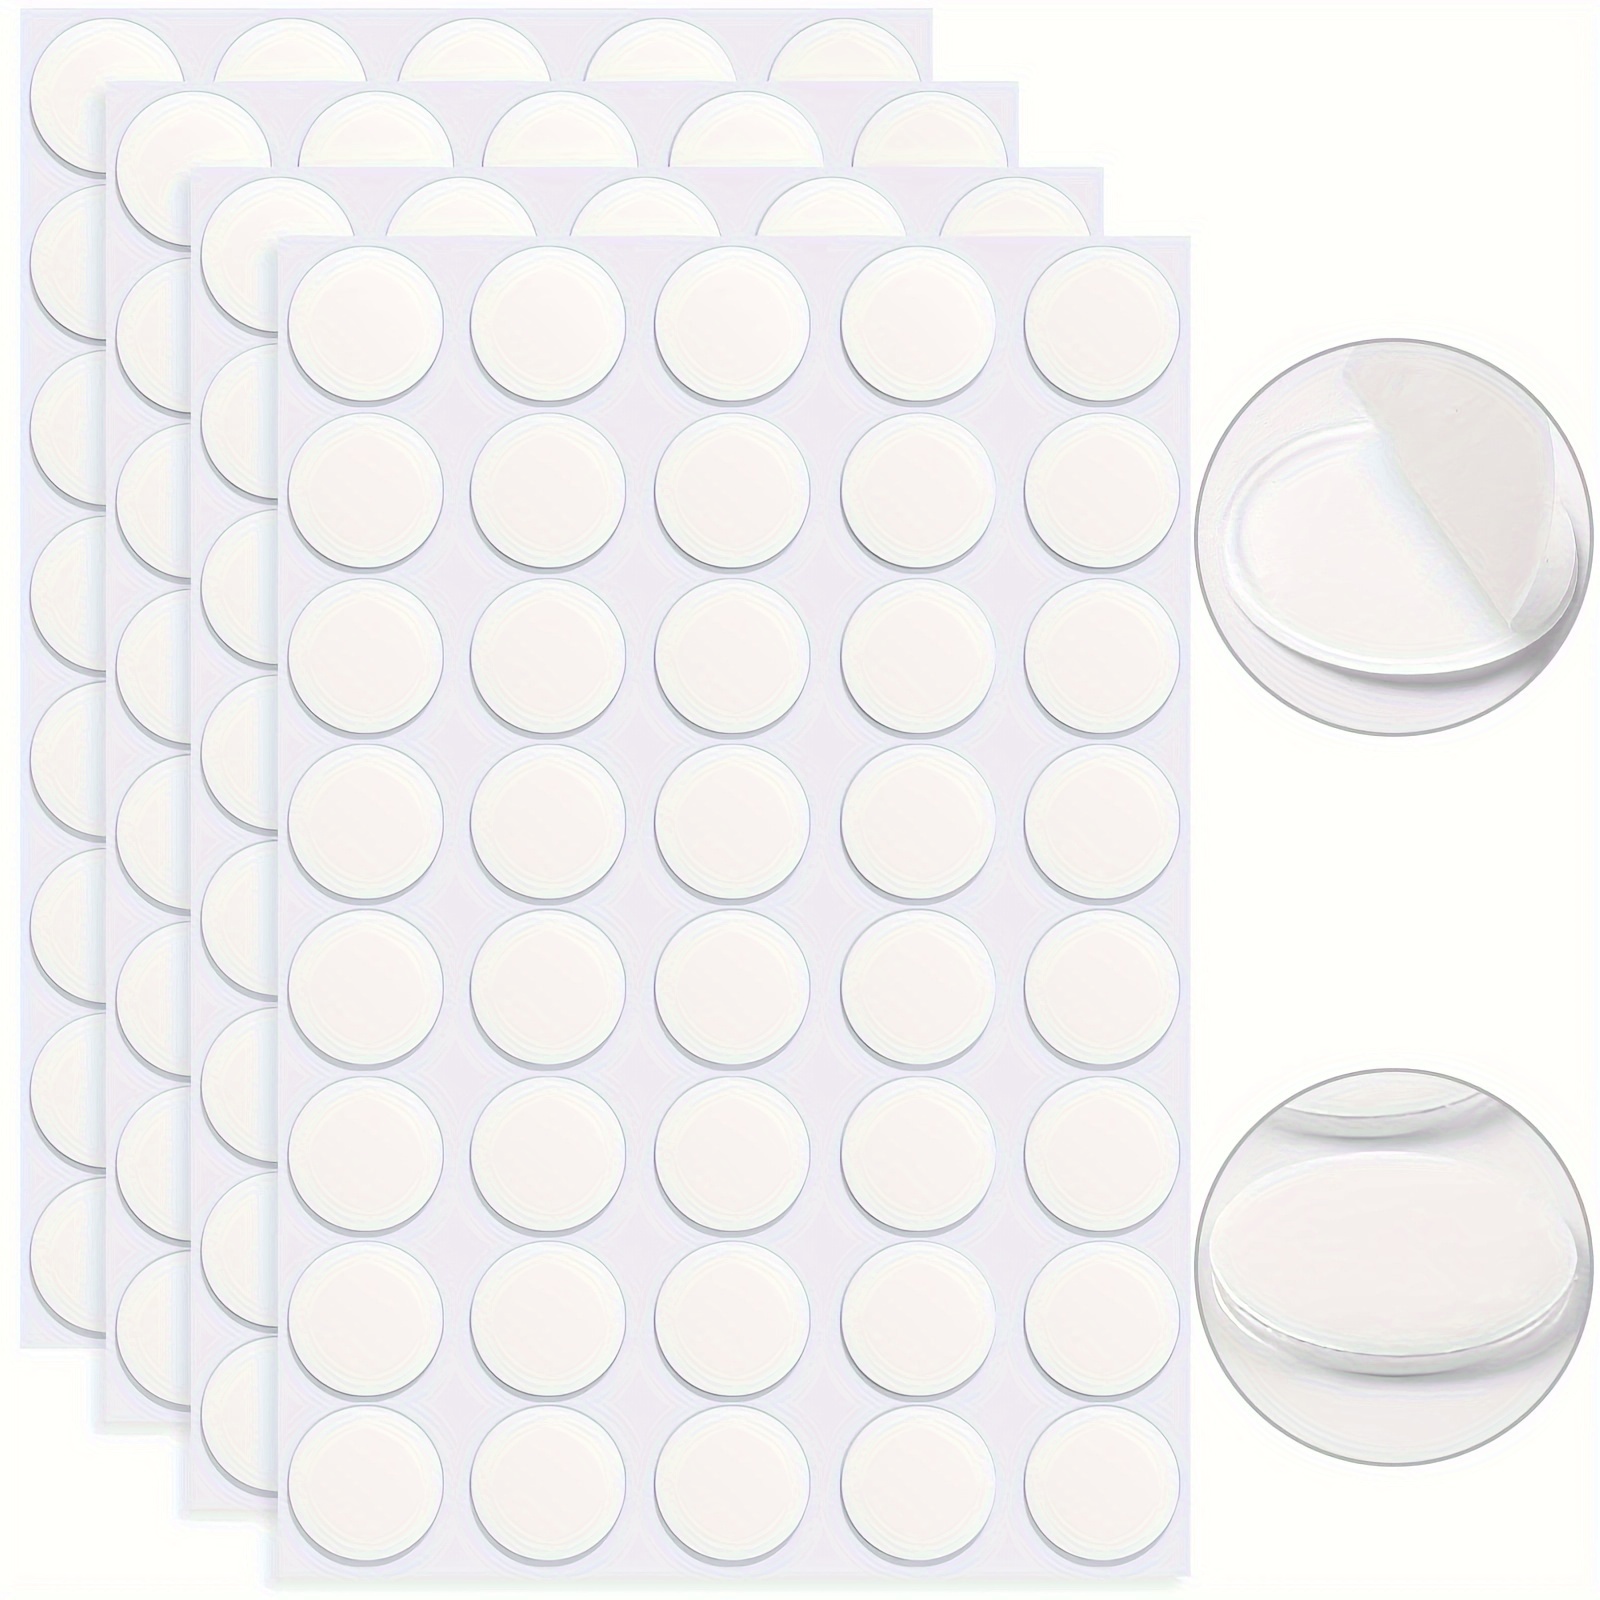 156 PCS Double Sided Adhesive Dots Removable Clear Sticky Putty No